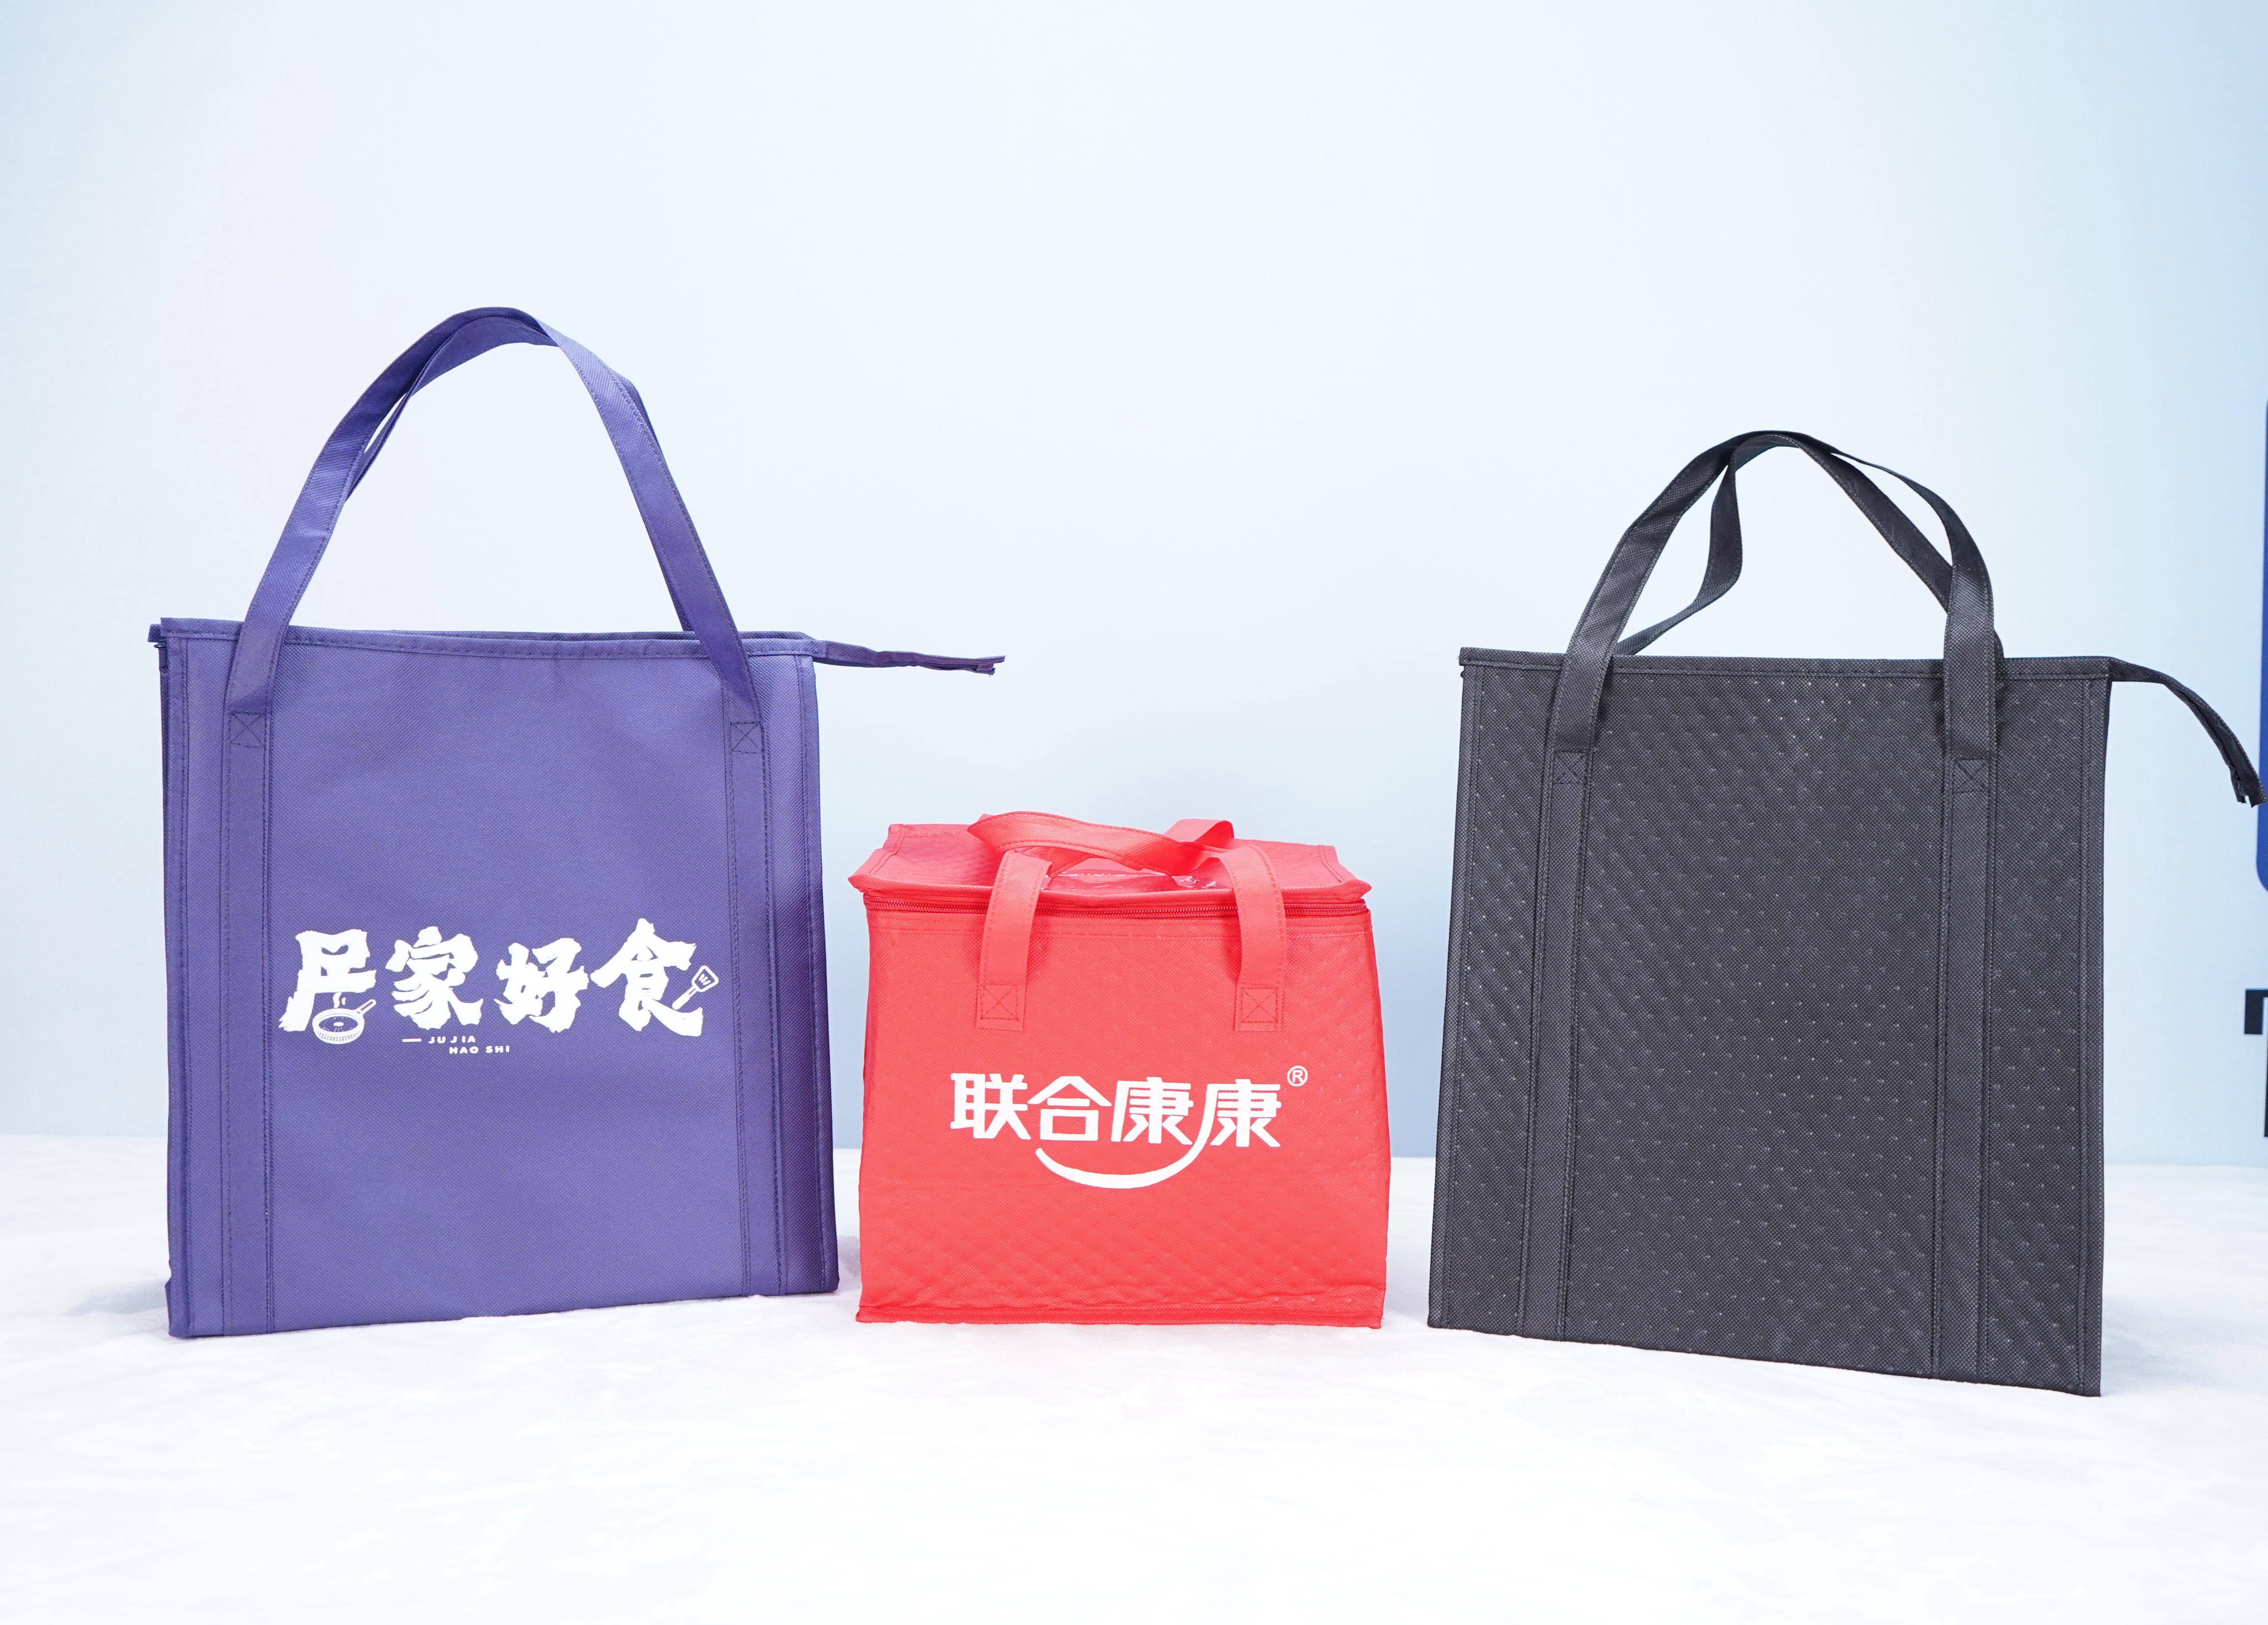 //v4-upload.goalsites.com/760/image_1652691026_Silk-printing-Heat-transfer-printing-Hand-Sewing-PP-non-woven-fabric-with-hot-stamping-2mm-foam-alumium-cooler-bag-thermal-bag-1-2-(1).JPG